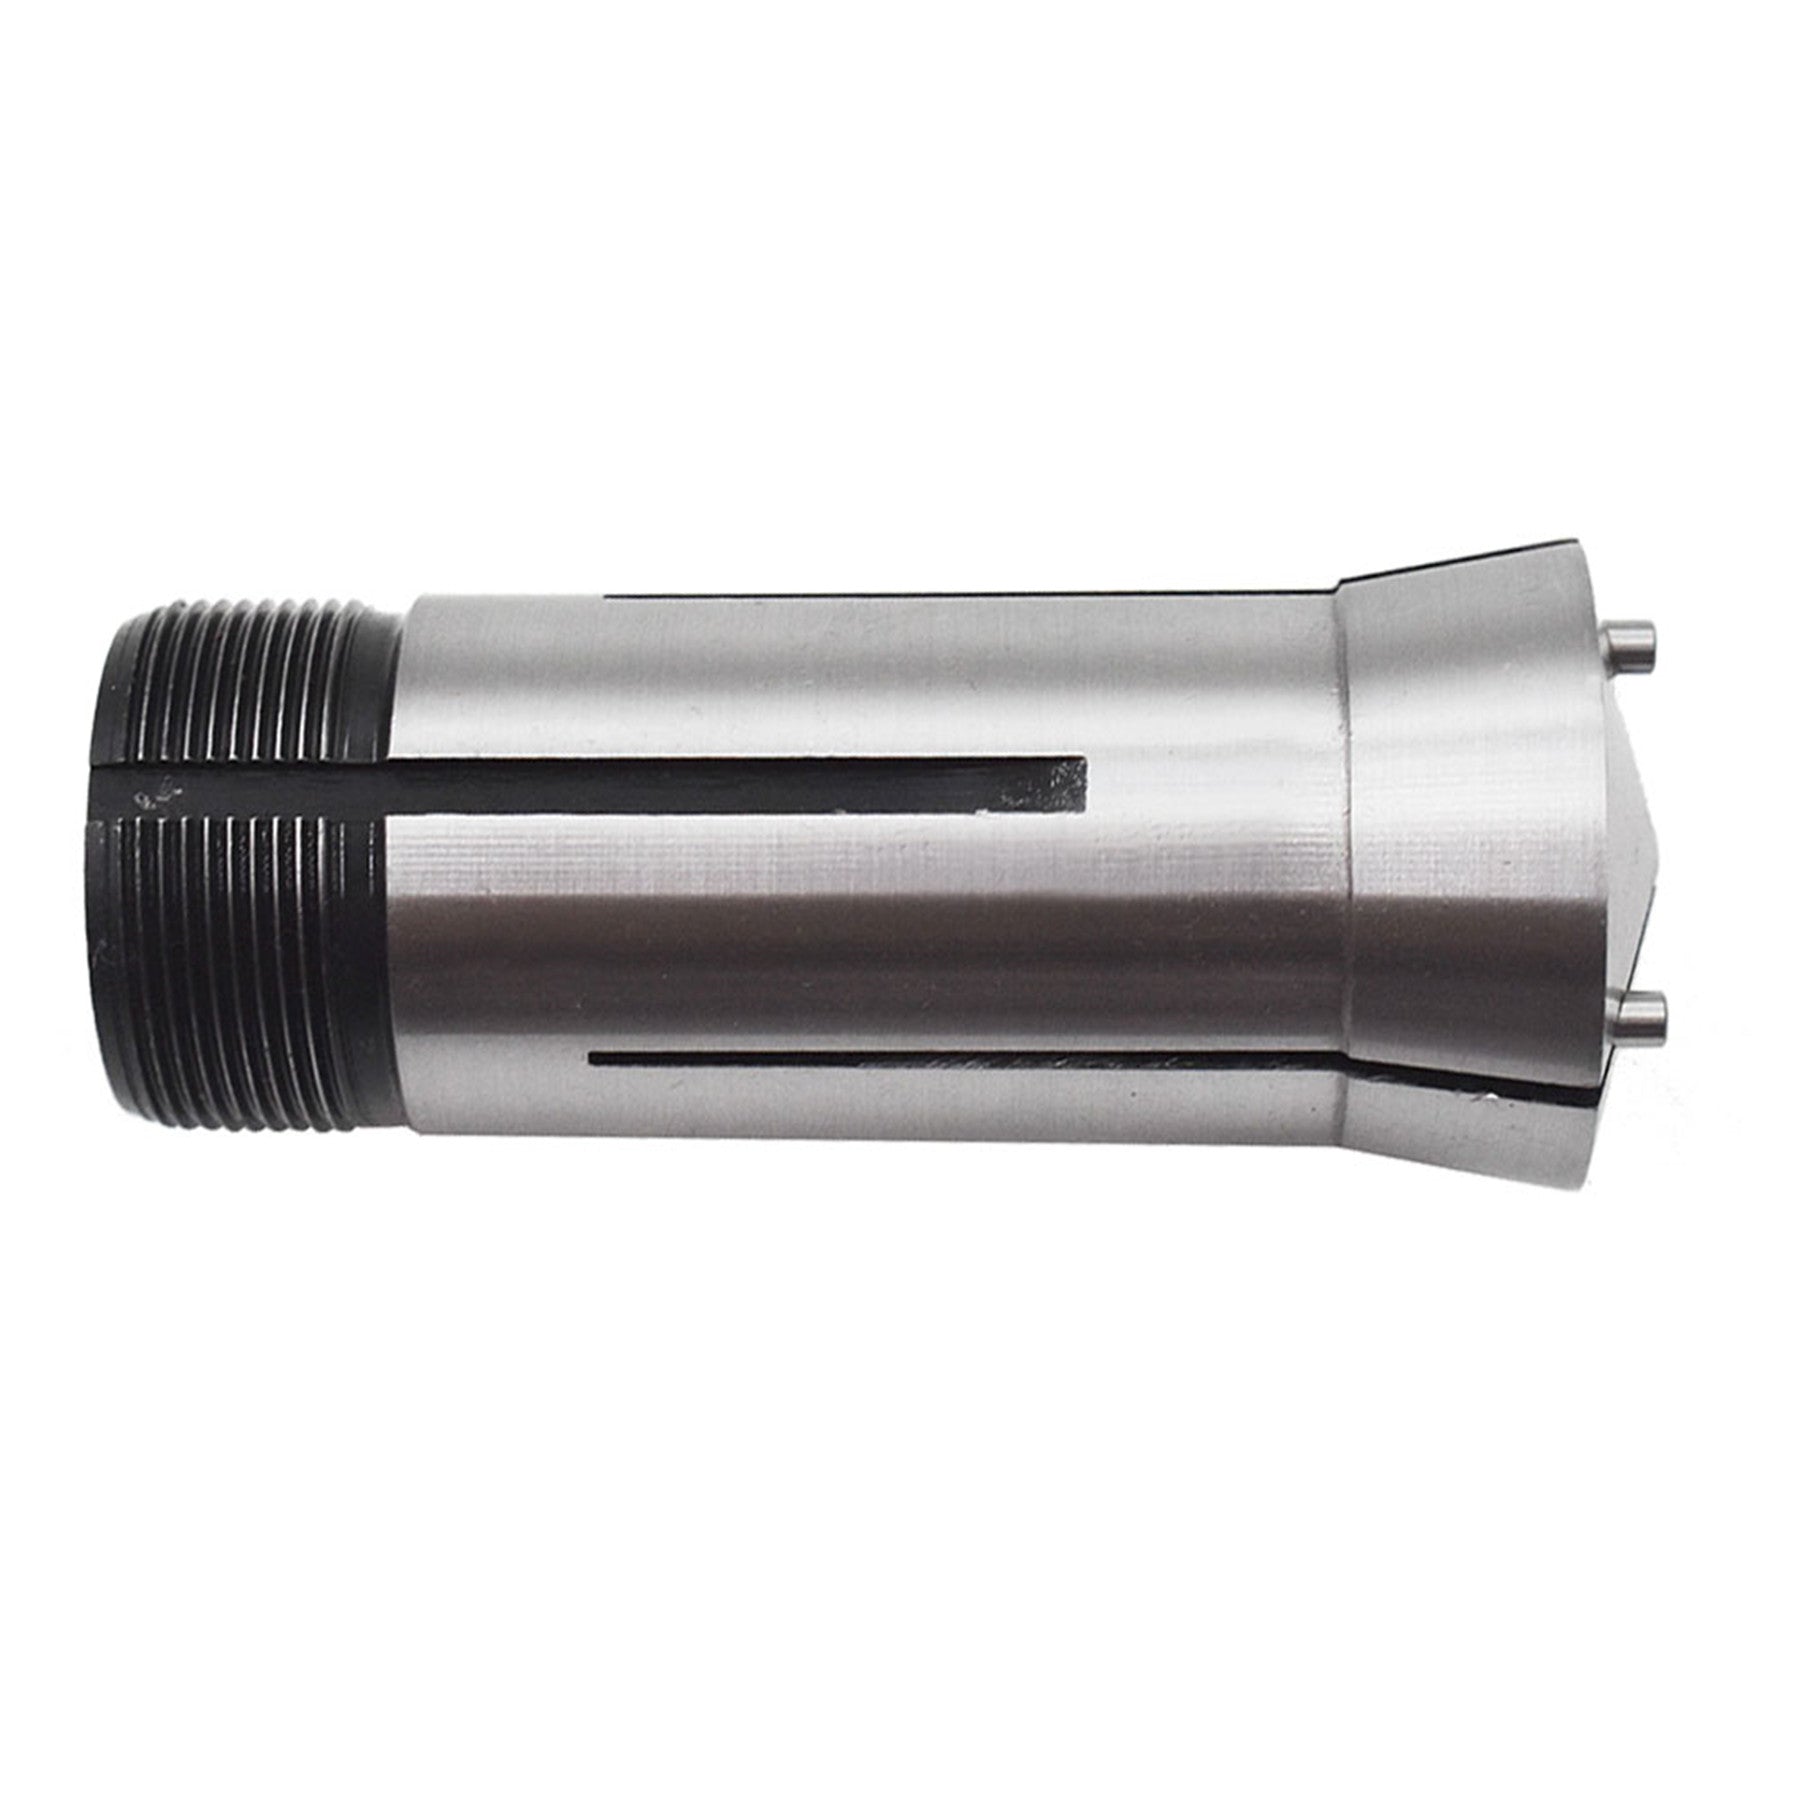 findmall  5C Emergency Steel Collet 1/16" For Lathe & Fixtures High Precision FINDMALLPARTS